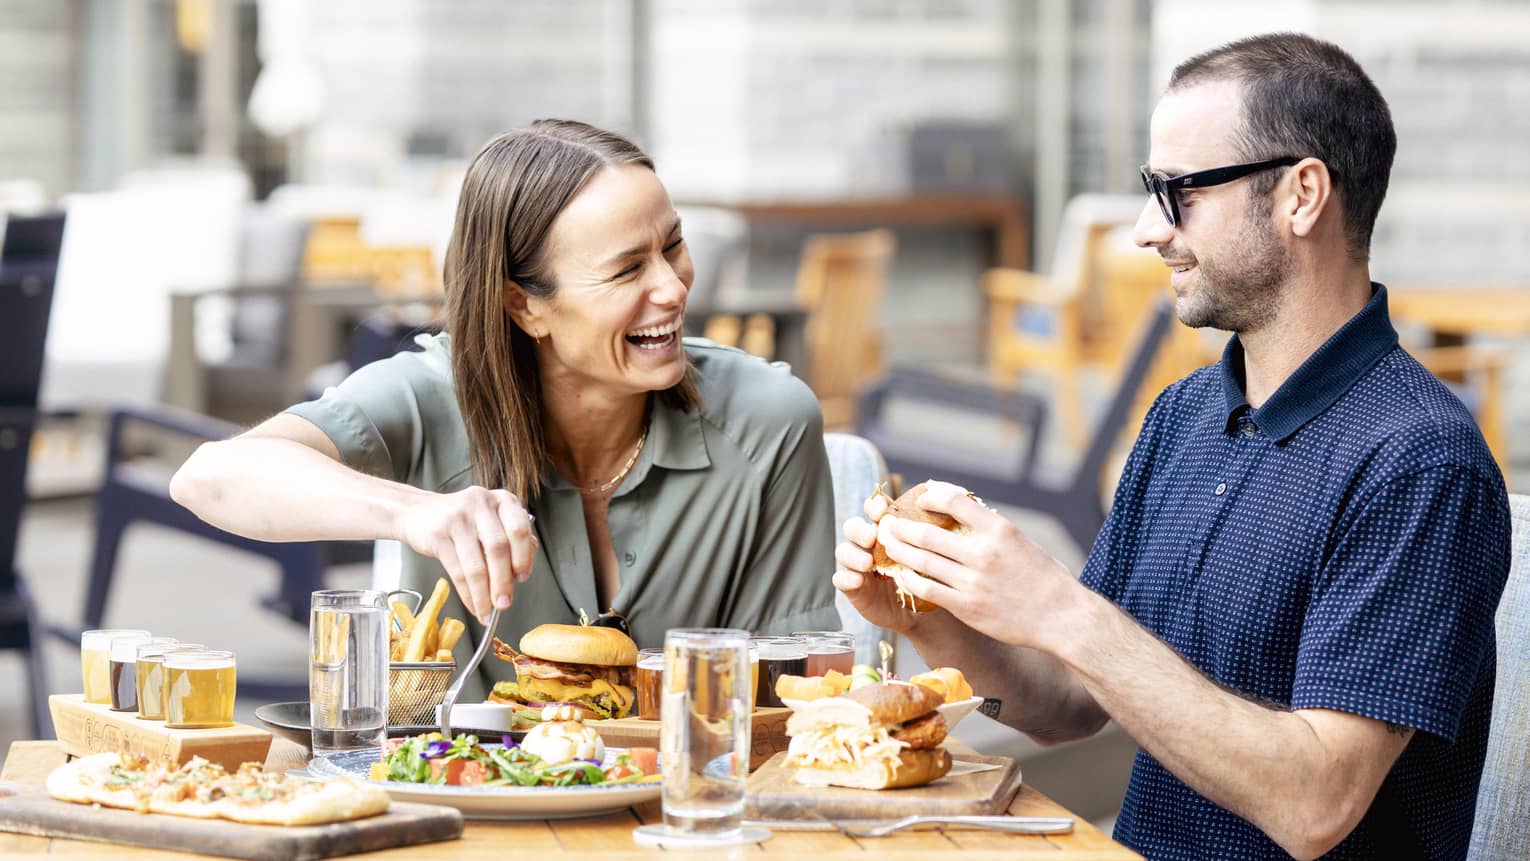 Laughing couple enjoys a meal on the outdoor terrace of a restaurant